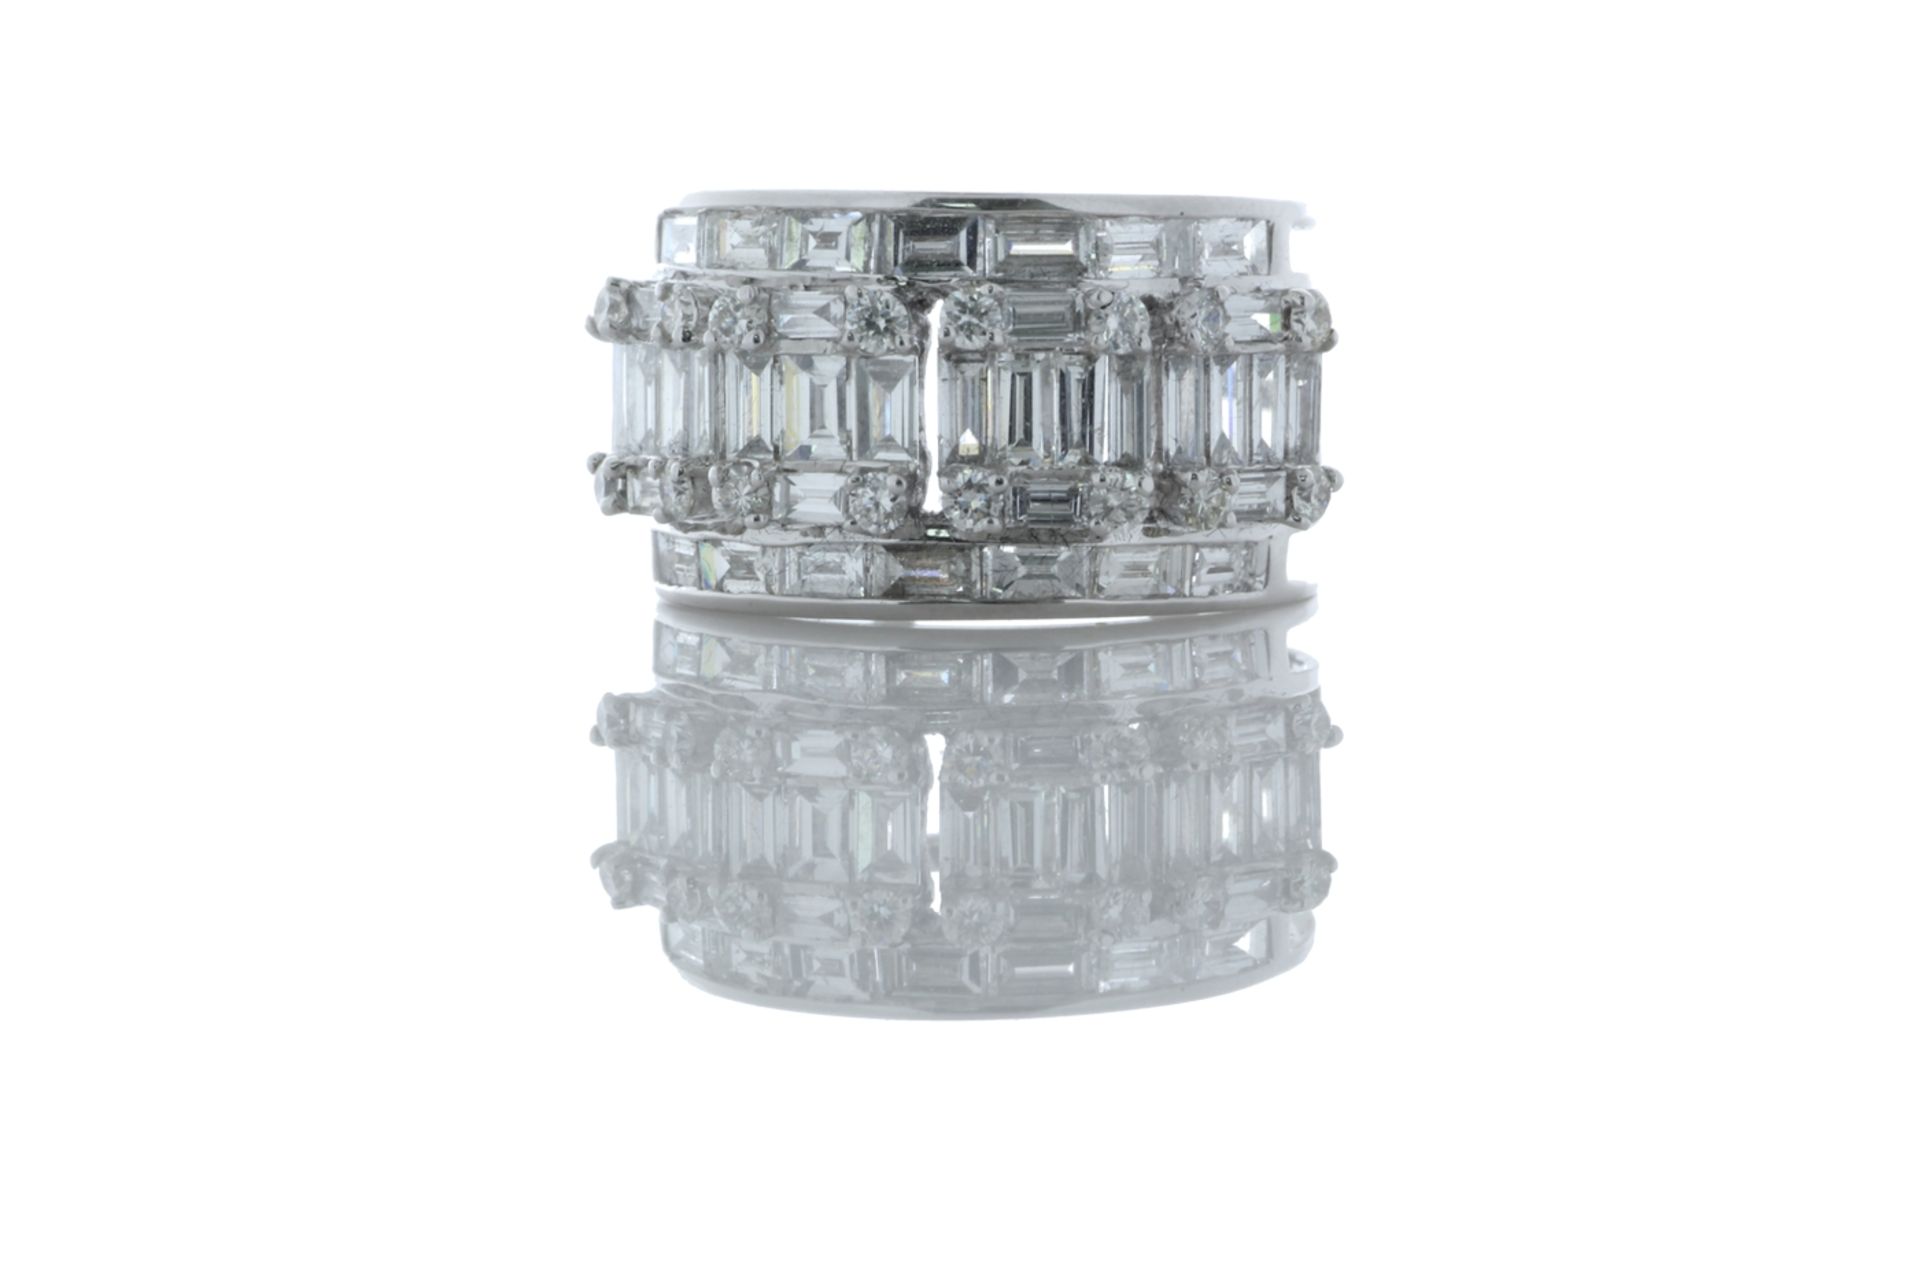 18ct White Gold Emerald Cut Eternity Diamond Ring 2.80 Carats - Valued By GIE £17,110.00 - This